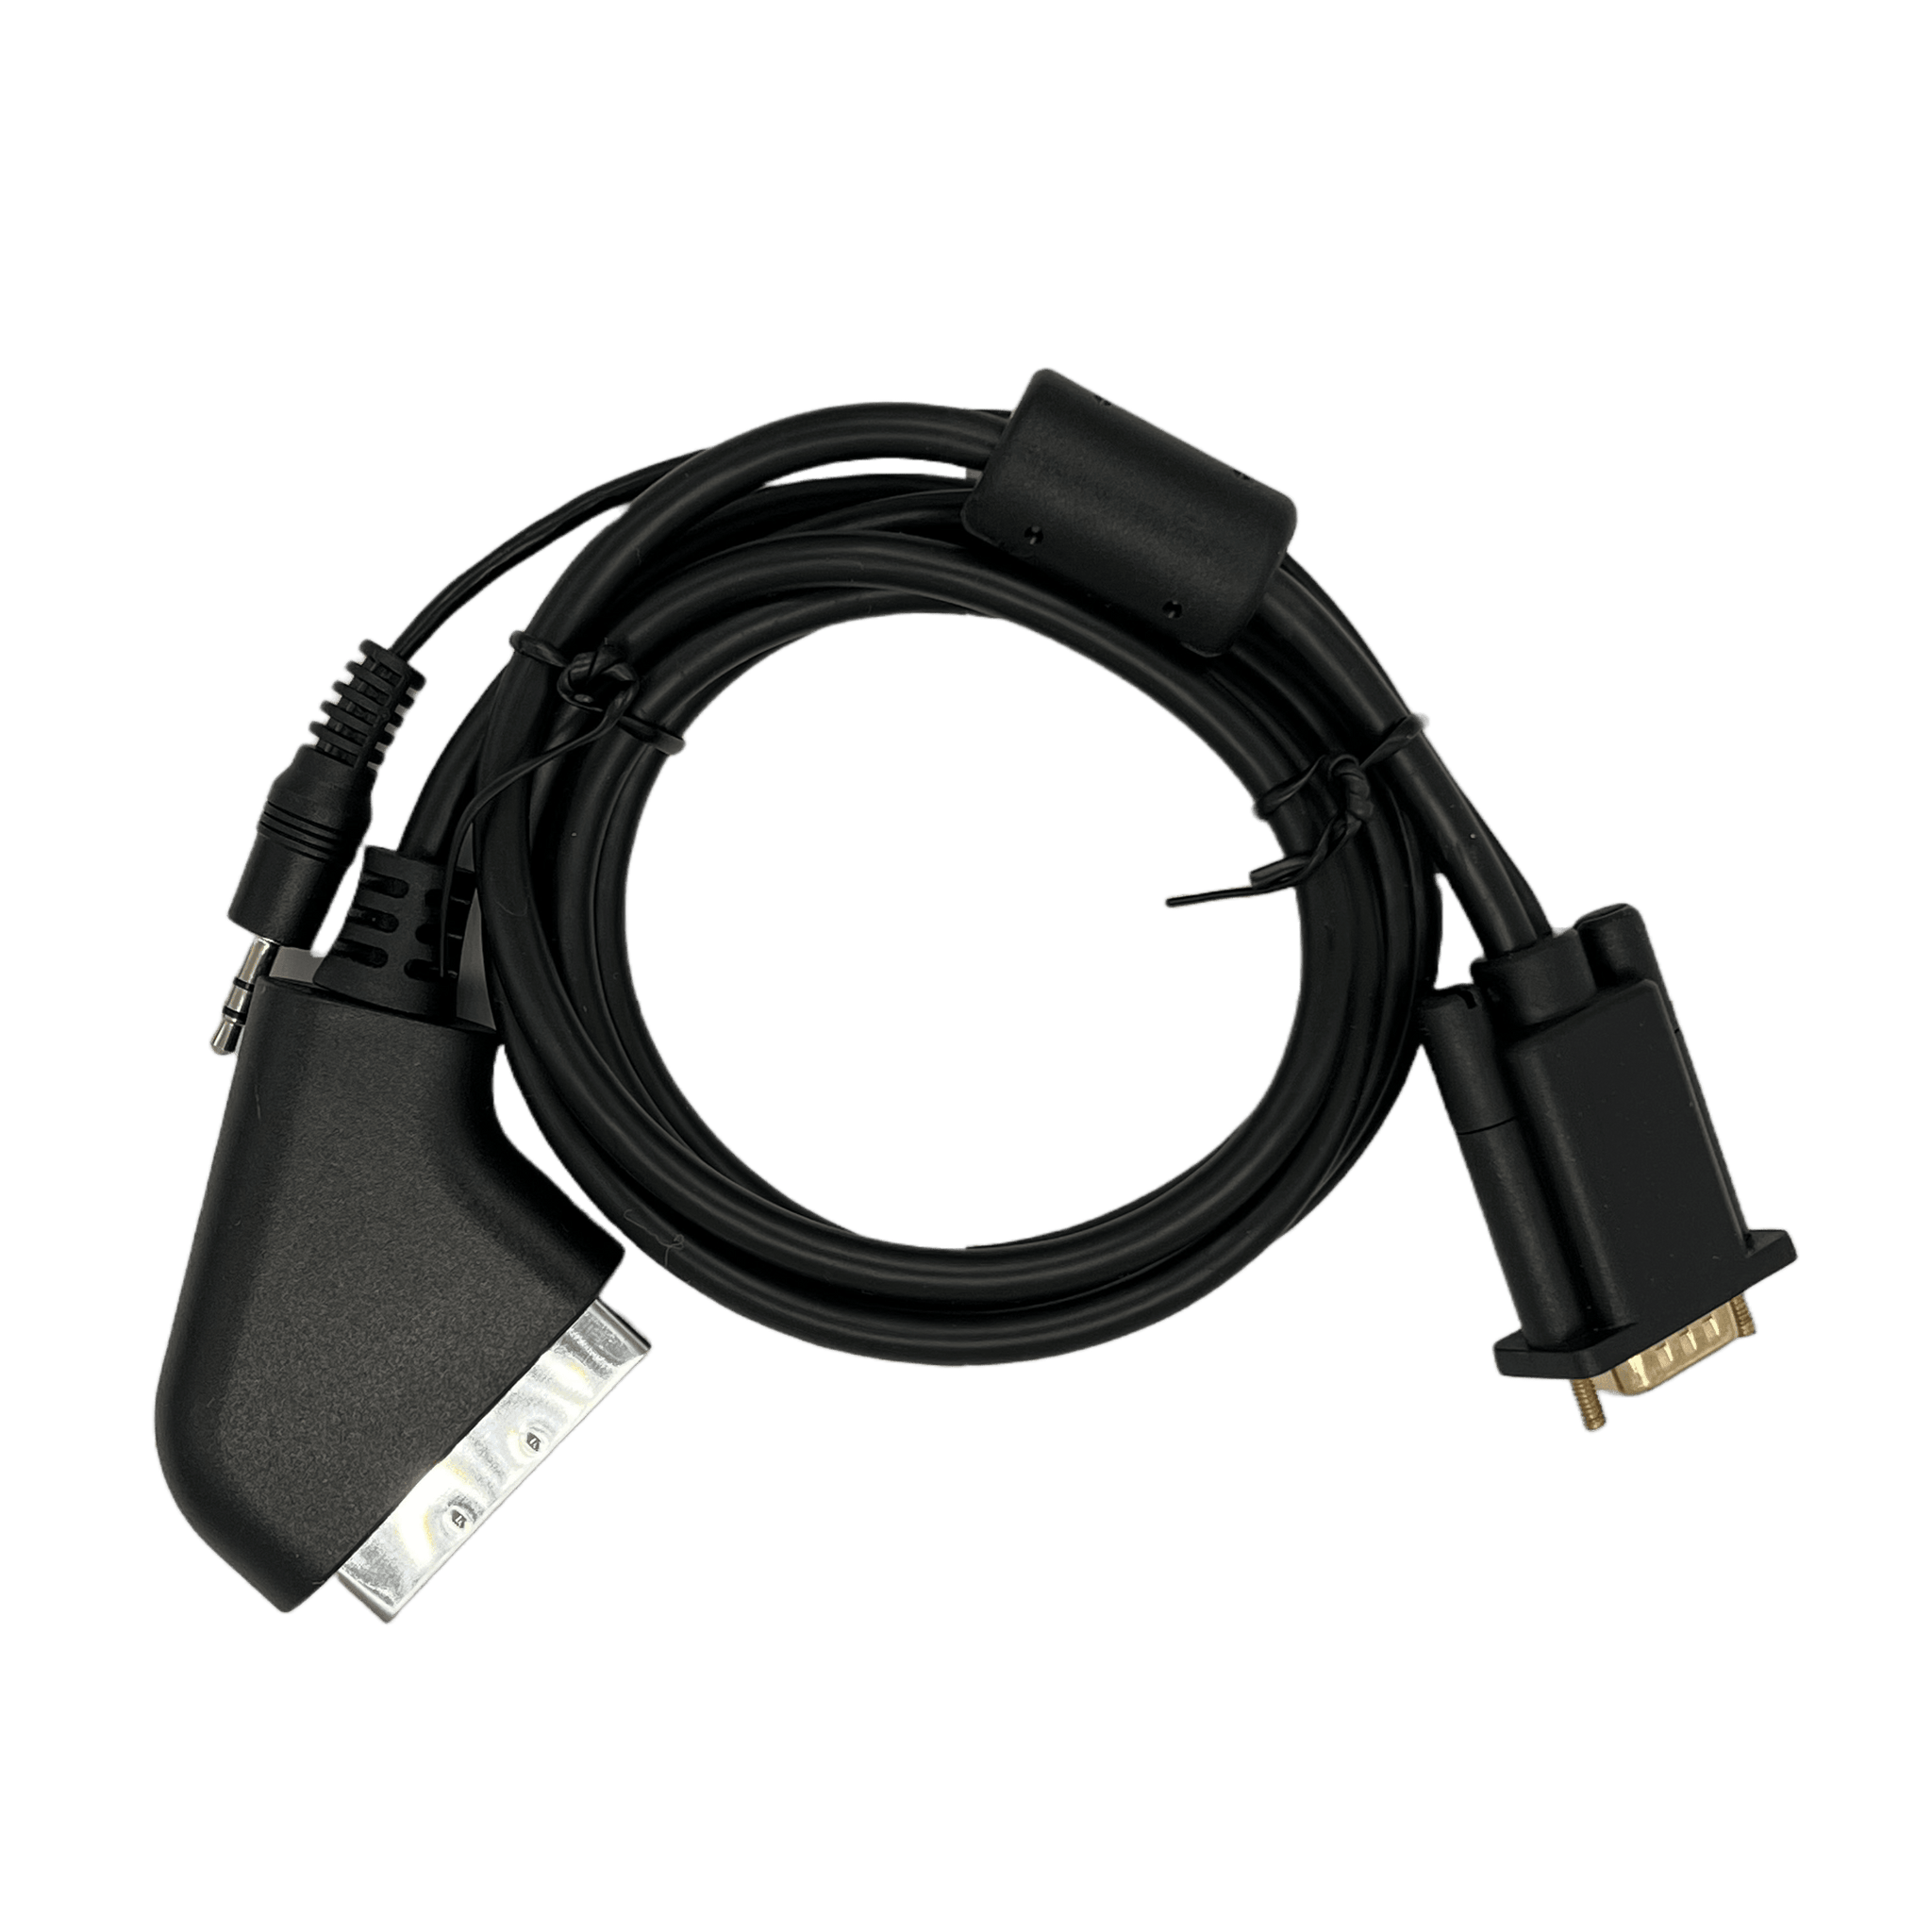 MiSTer VGA to RGB SCART Cable – Ultimate Mister FPGA